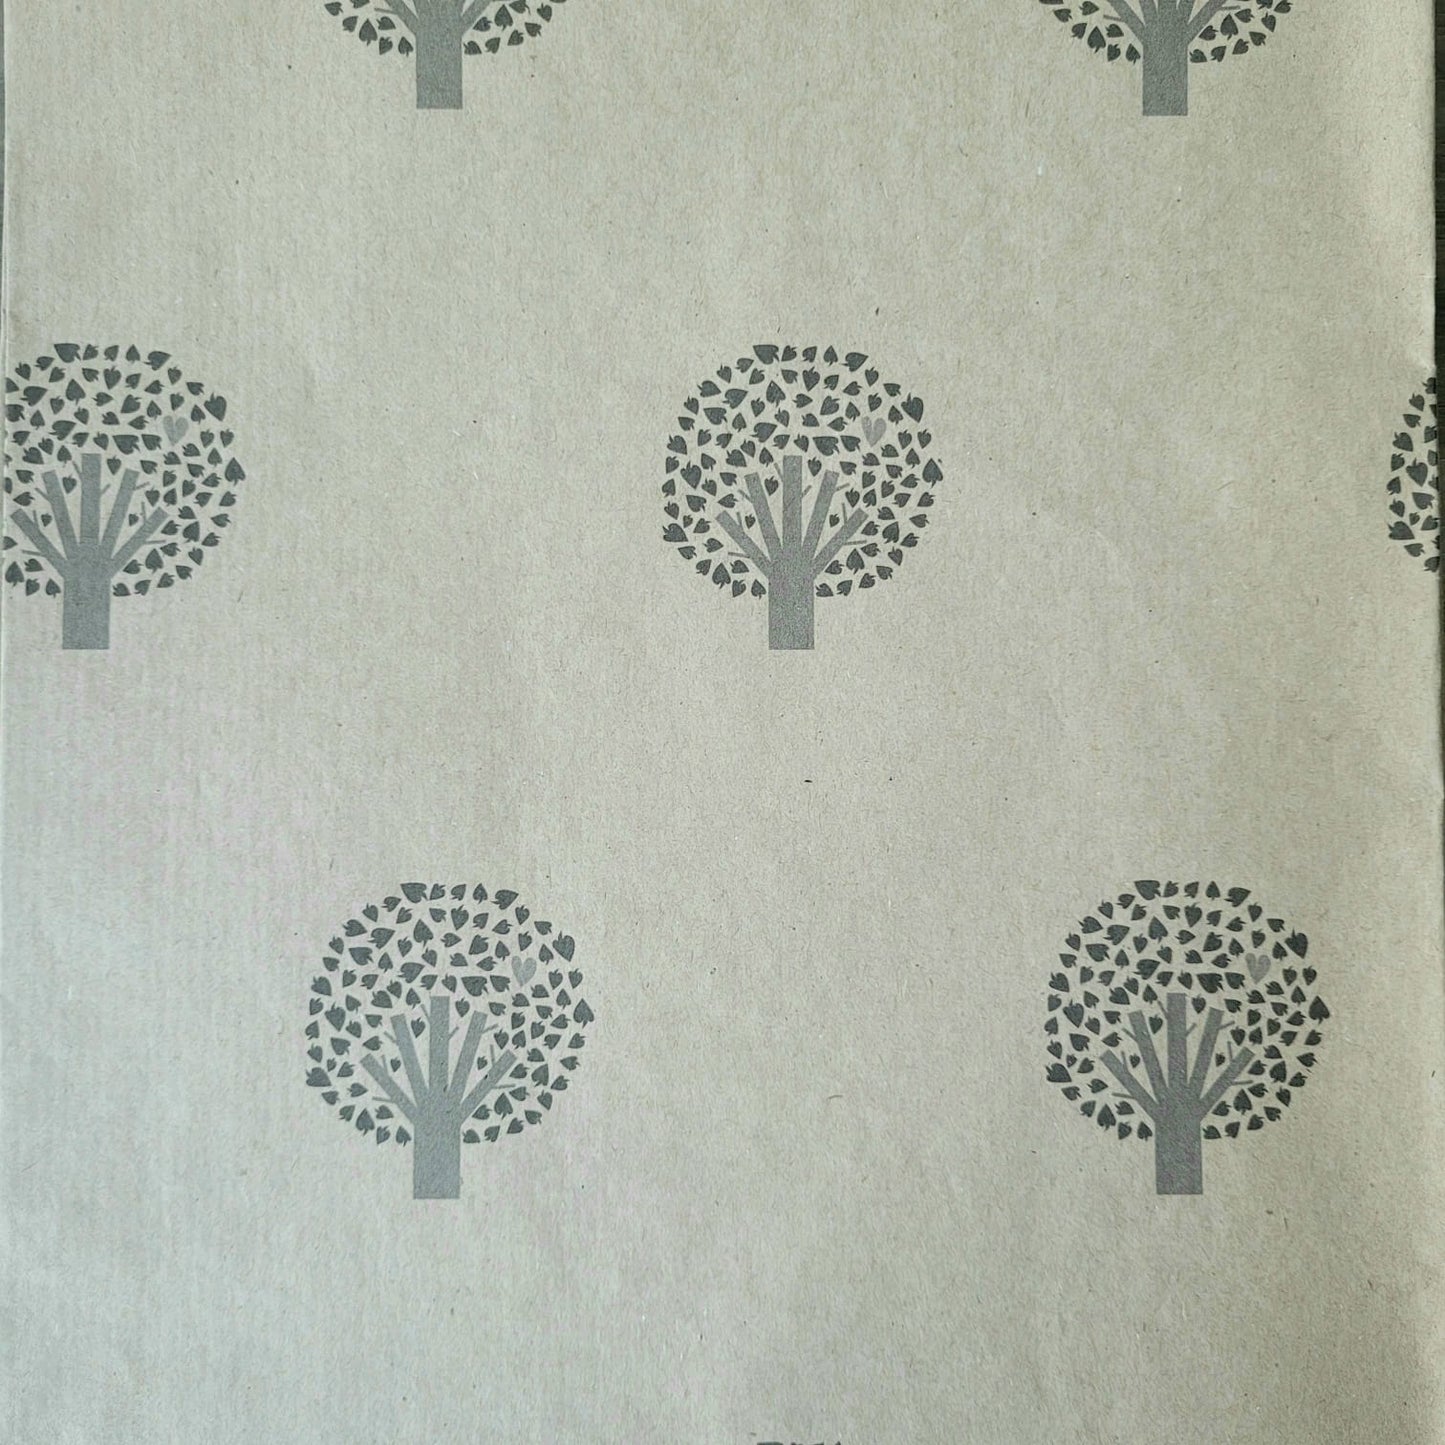 Tree of Life Print Gift Wrap - Recycled Kraft Paper